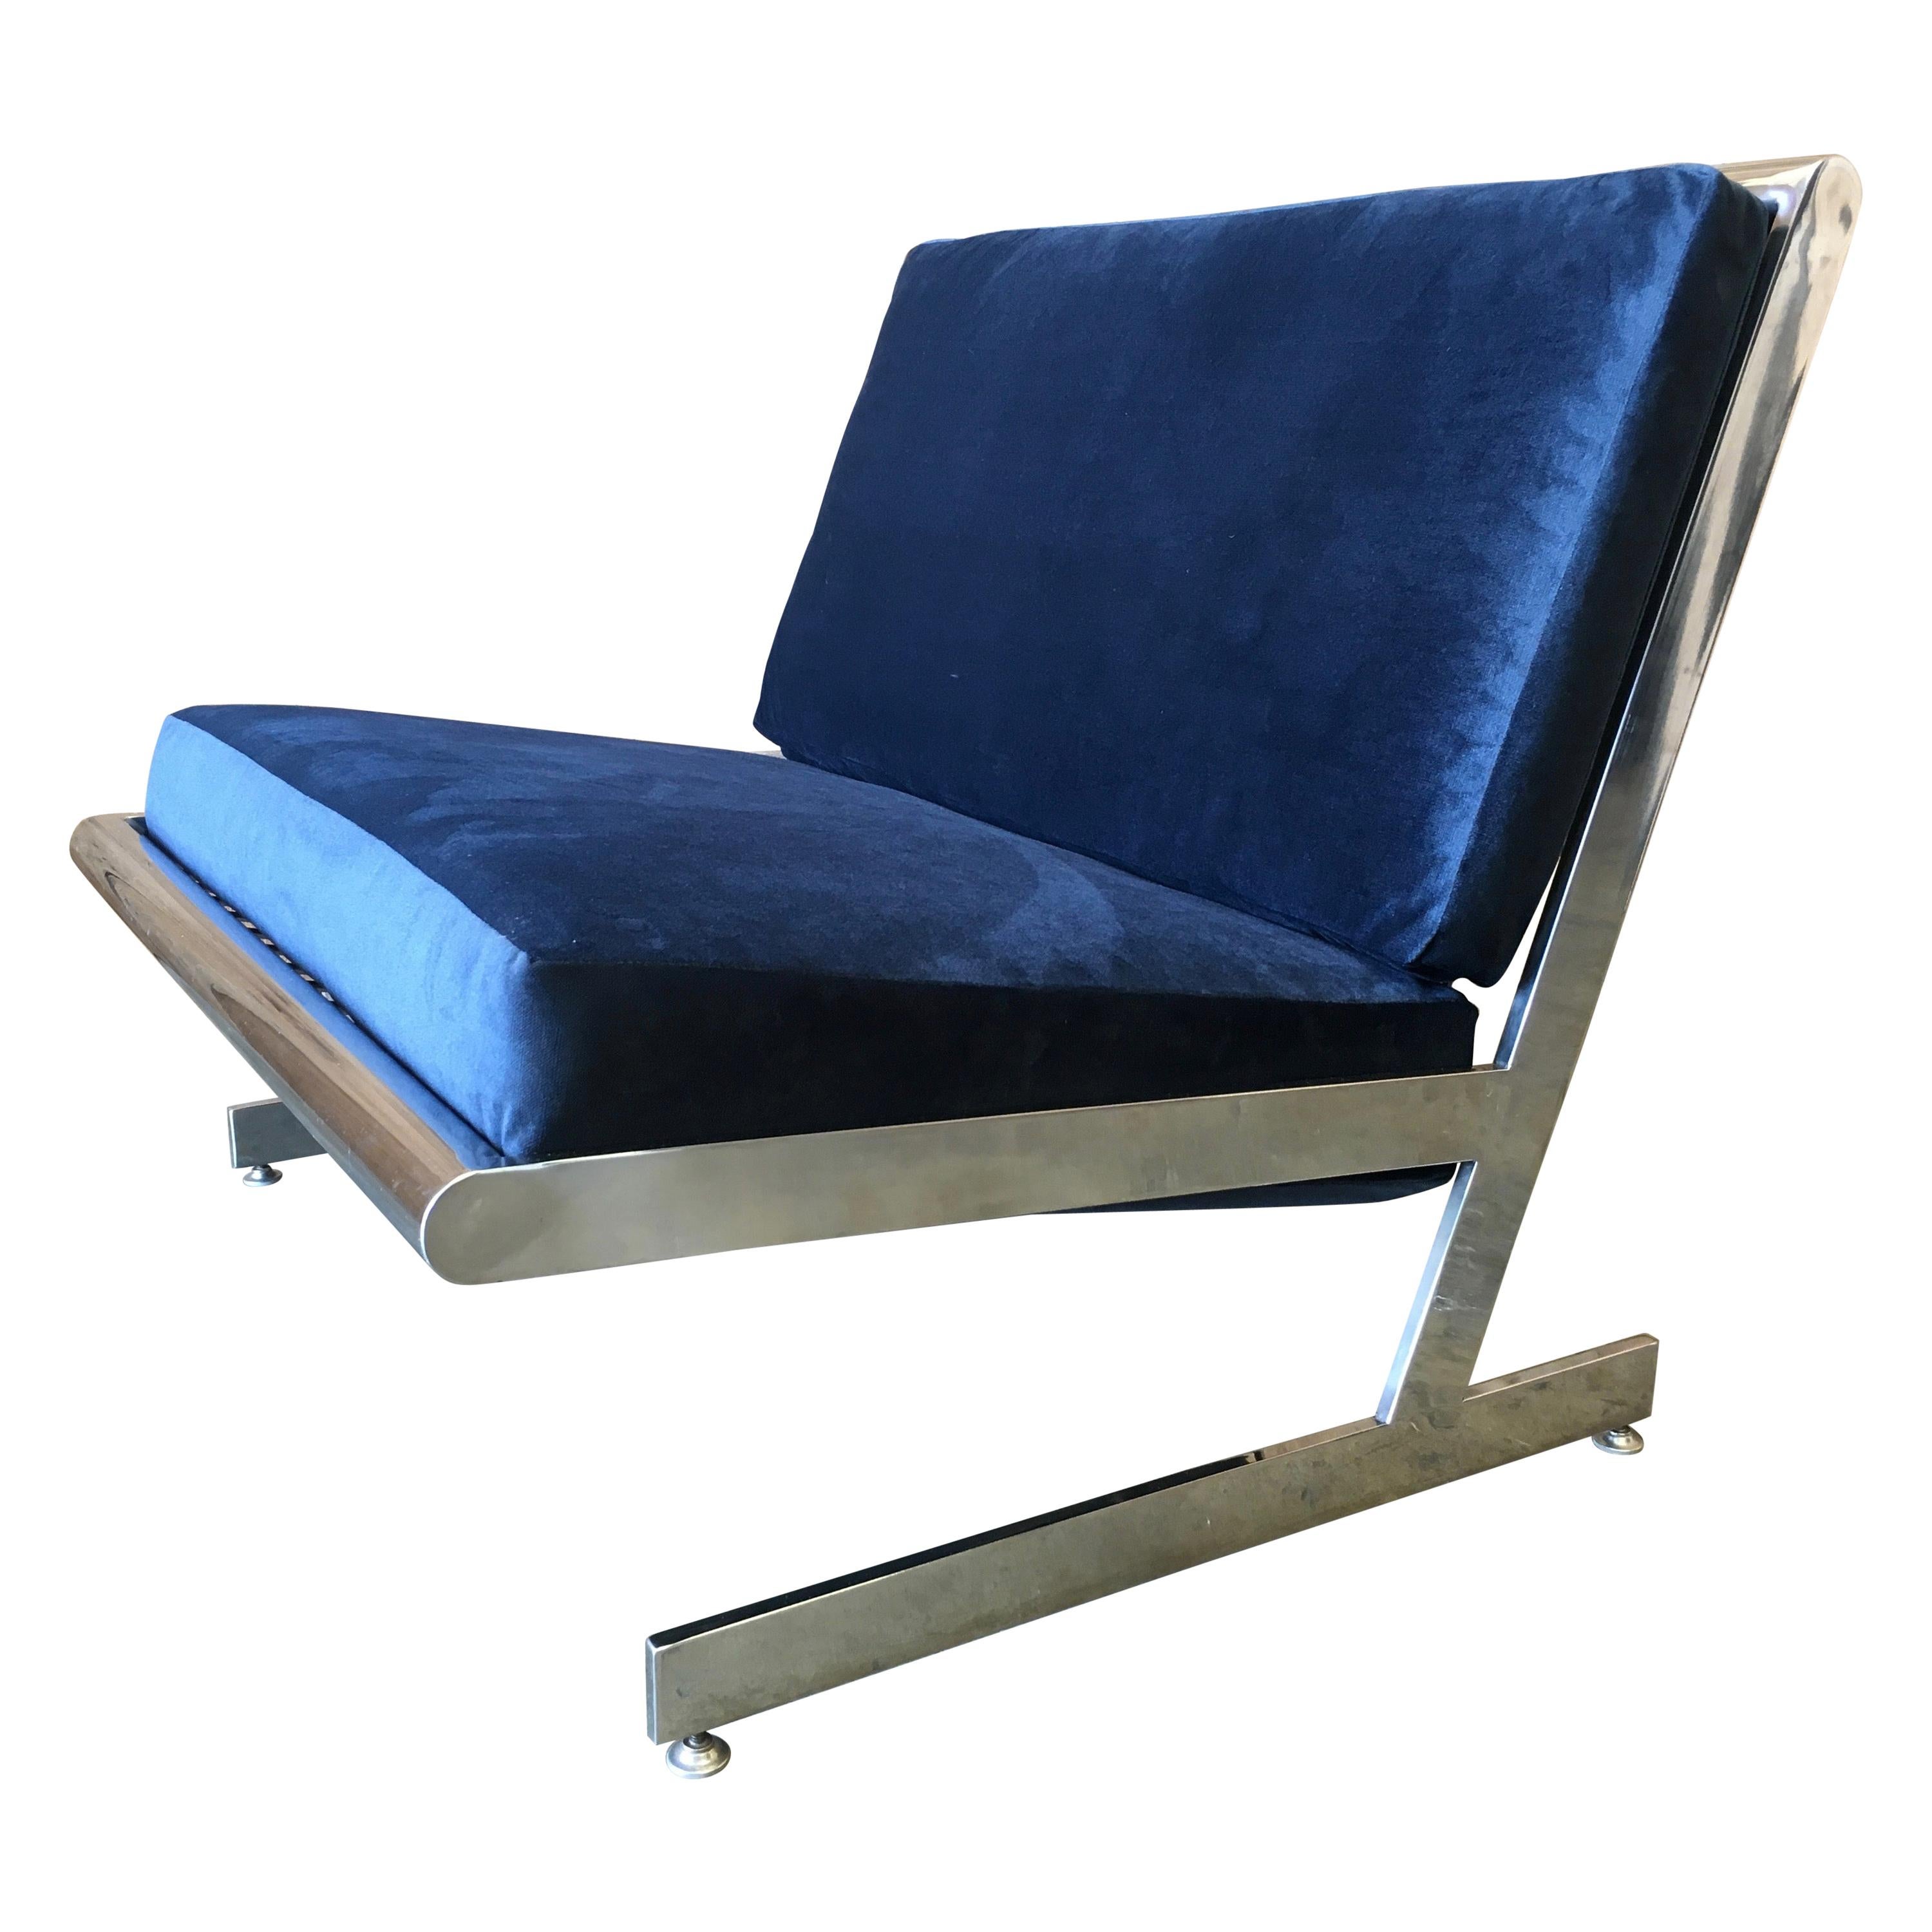 Stainless Steel Cantilevered Lounge Chair